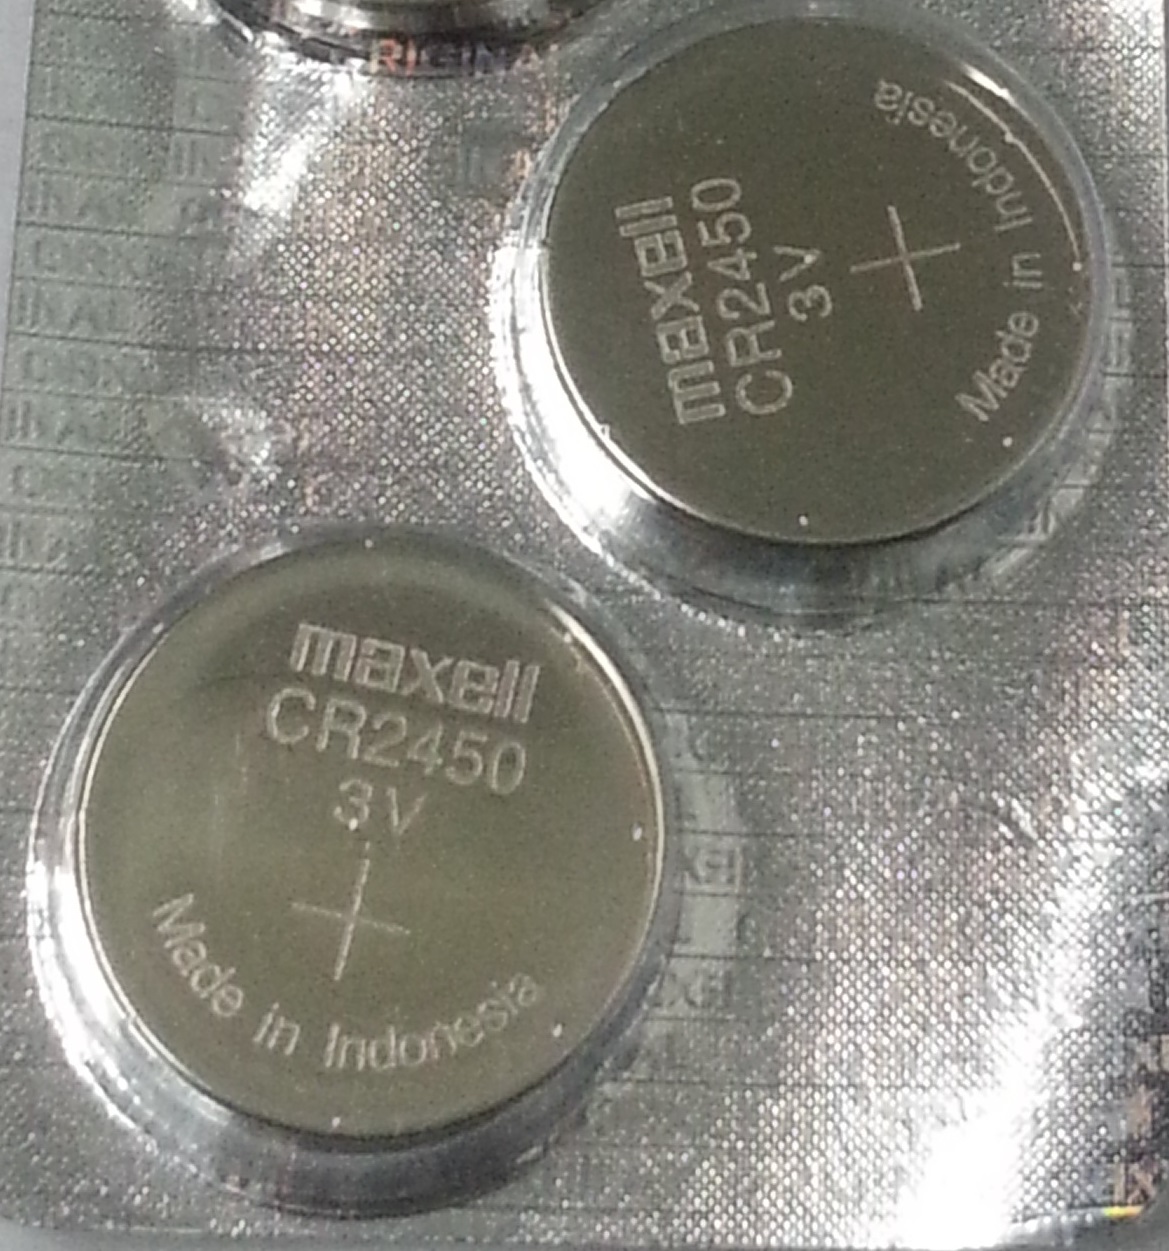 Maxell CR2450 3V Lithium Coin Battery - 2 Pack + FREE SHIPPING!